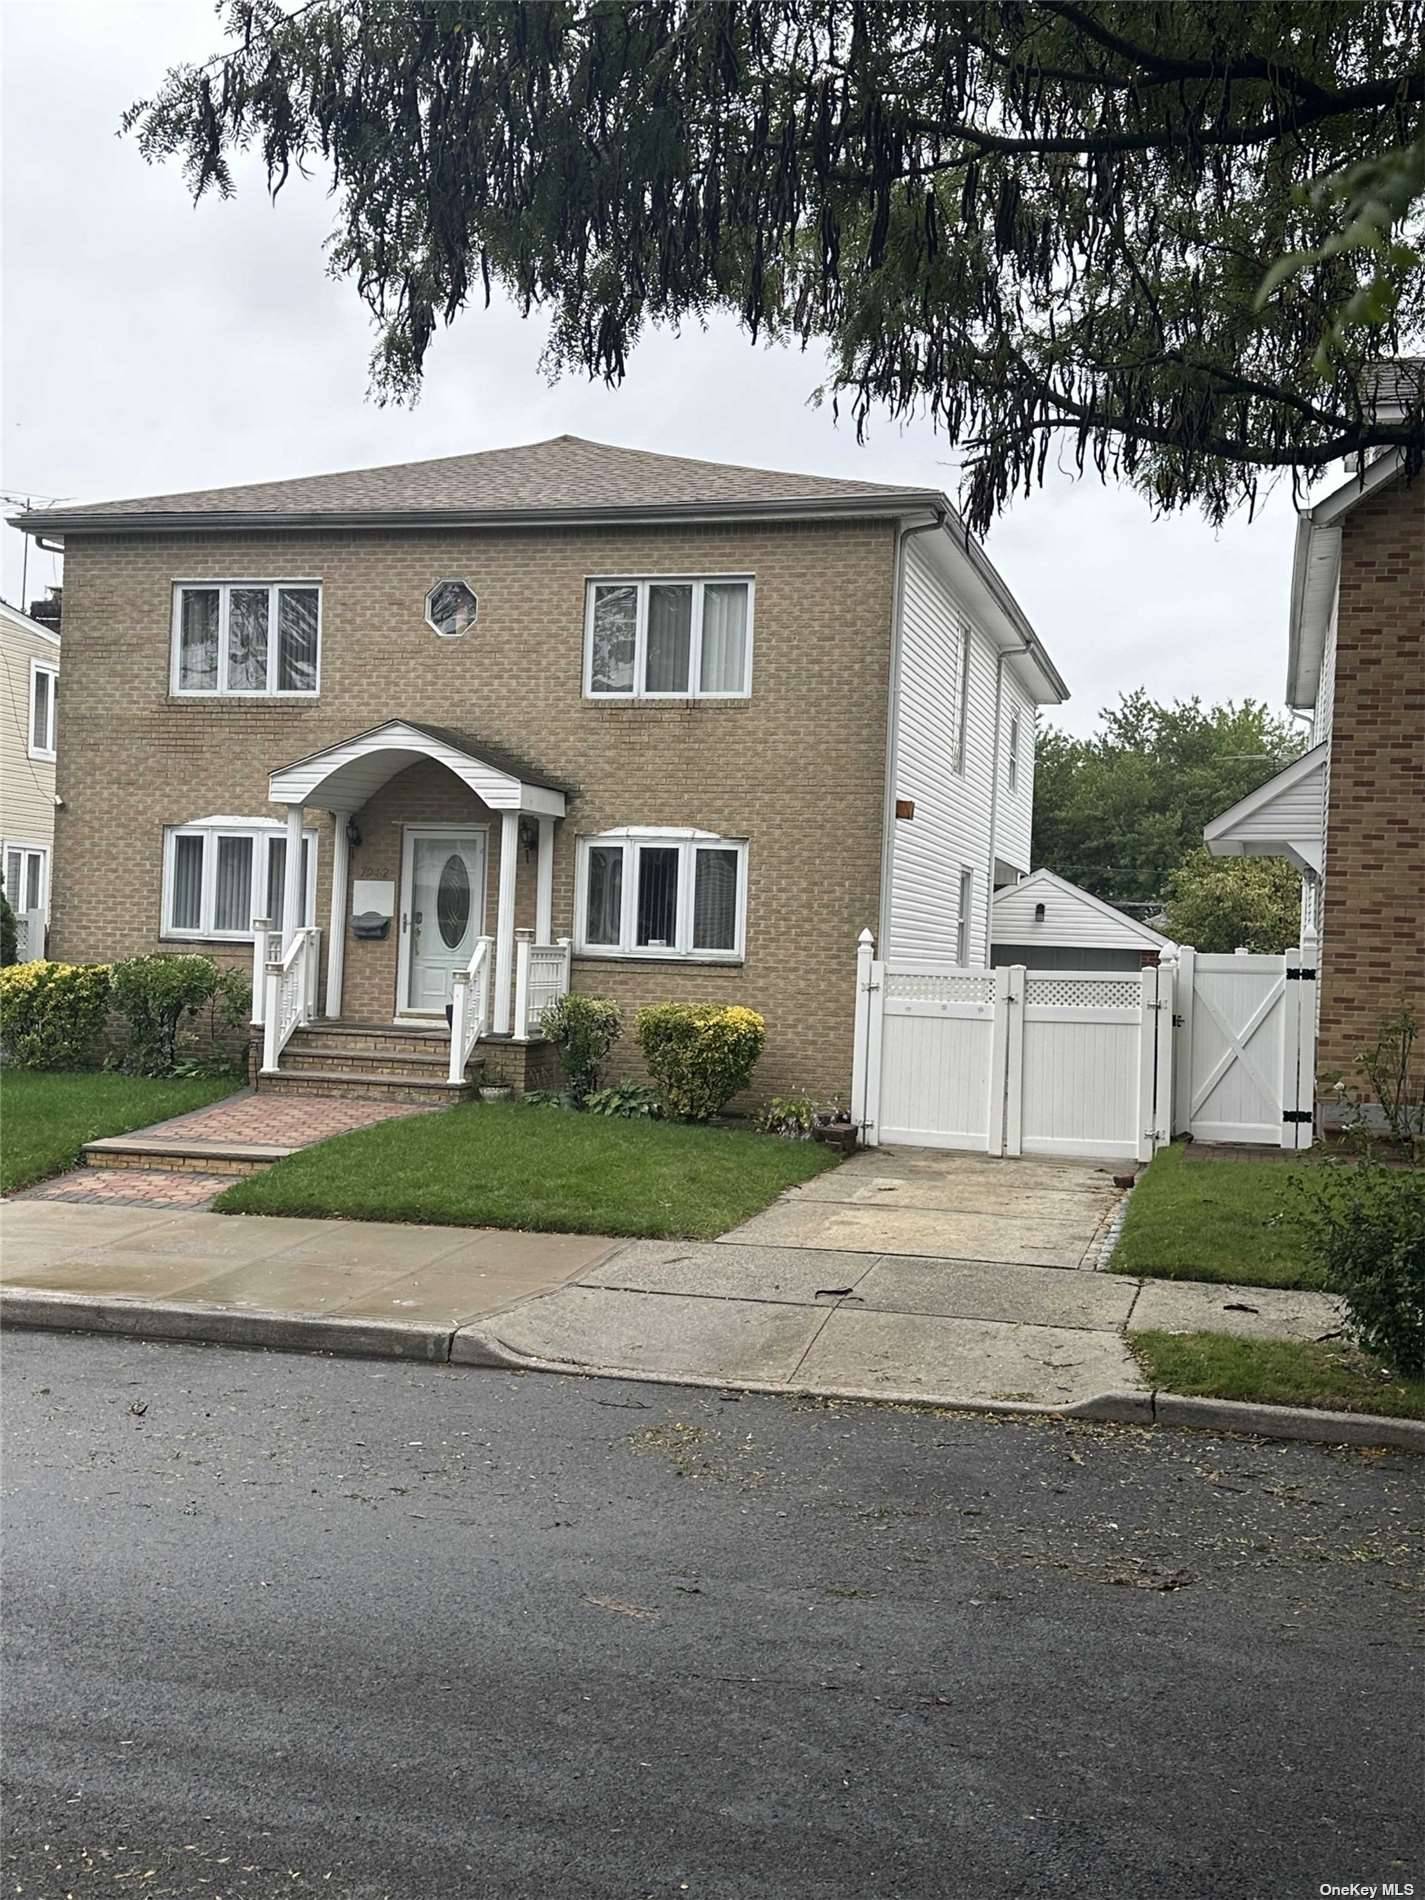 This charming SFR in Glen Oaks, NY was built in 1955 and offers a comfortable and spacious living space.